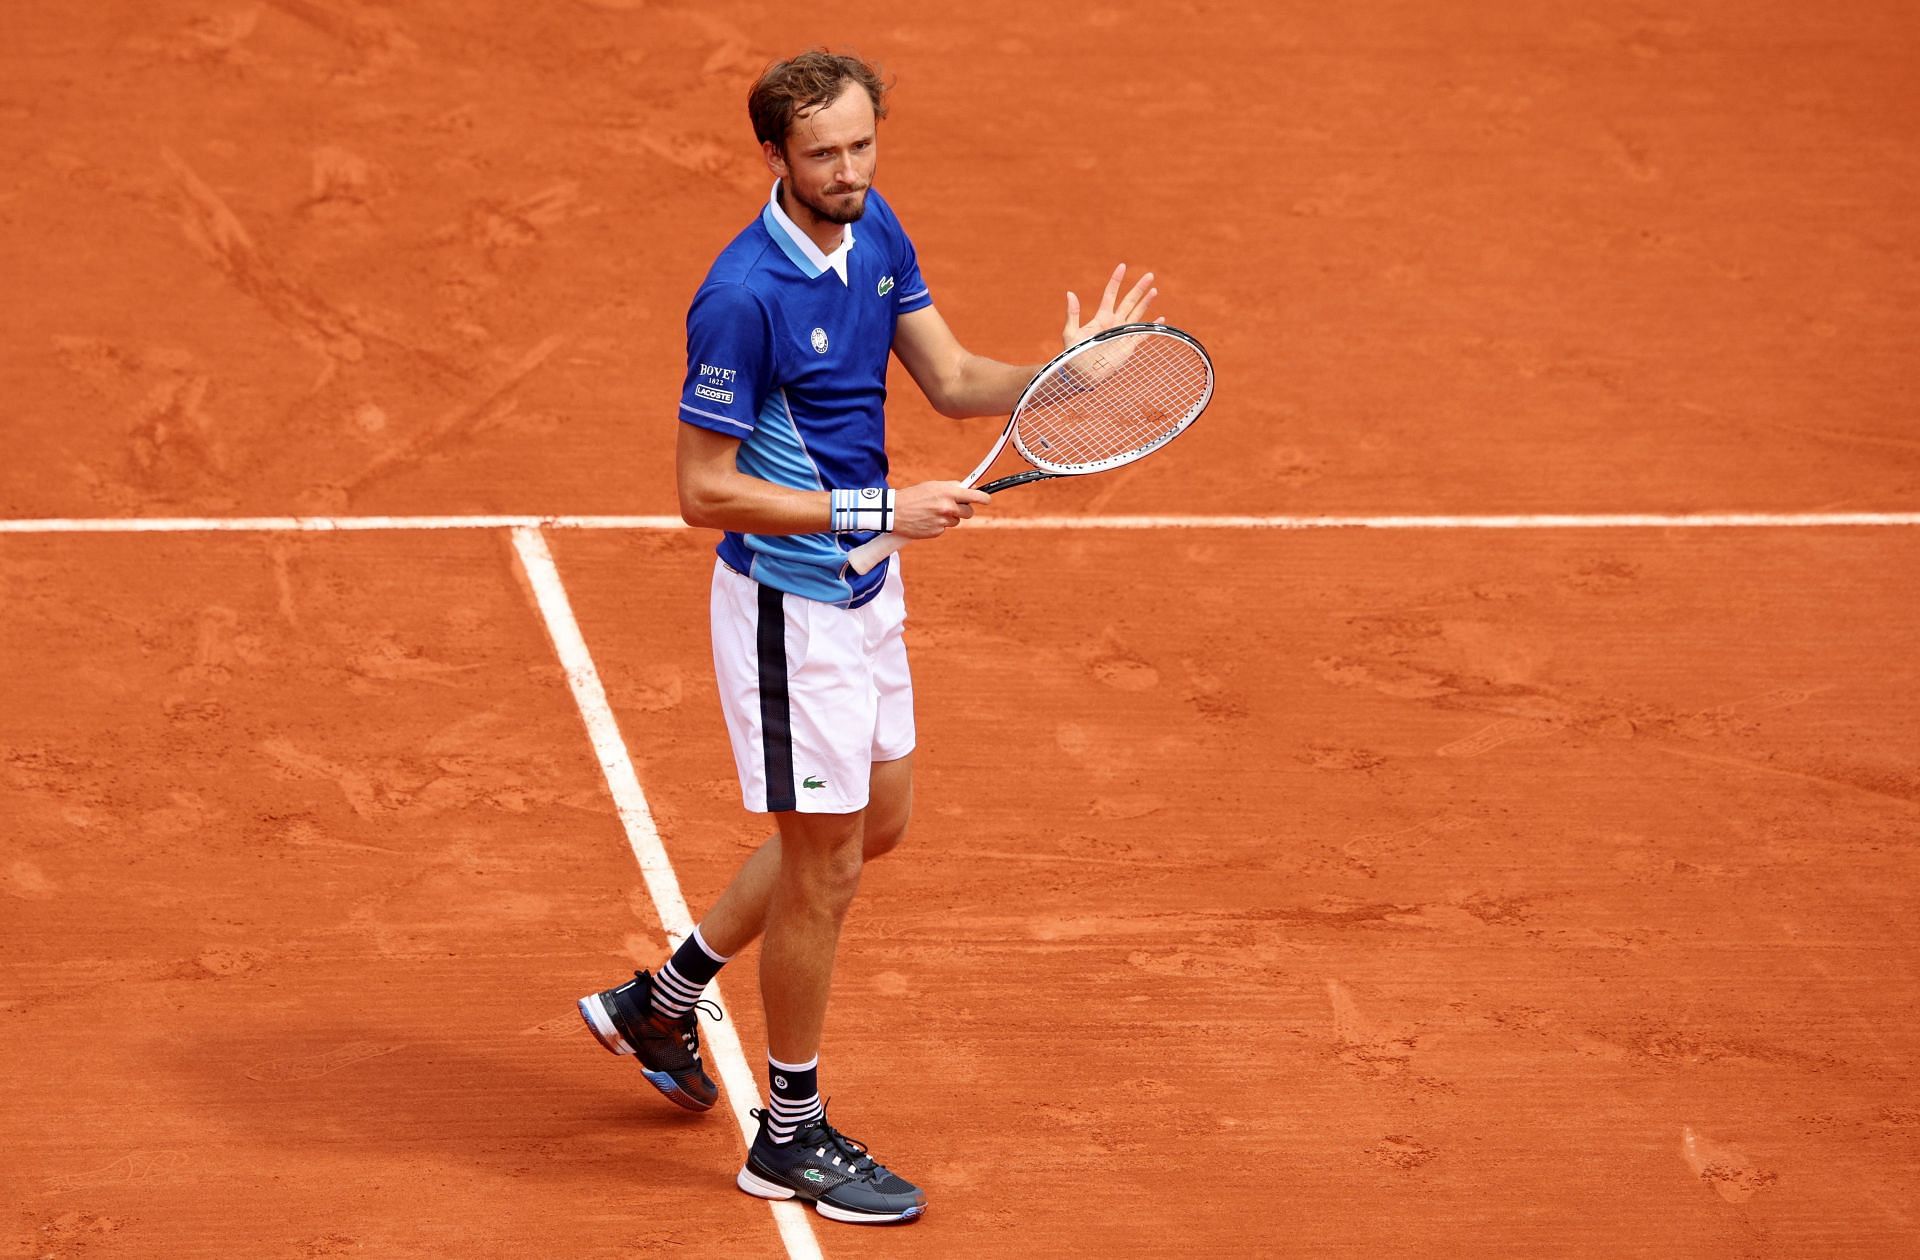 Daniil Medvedev became World No. 1 for the first time earlier this season